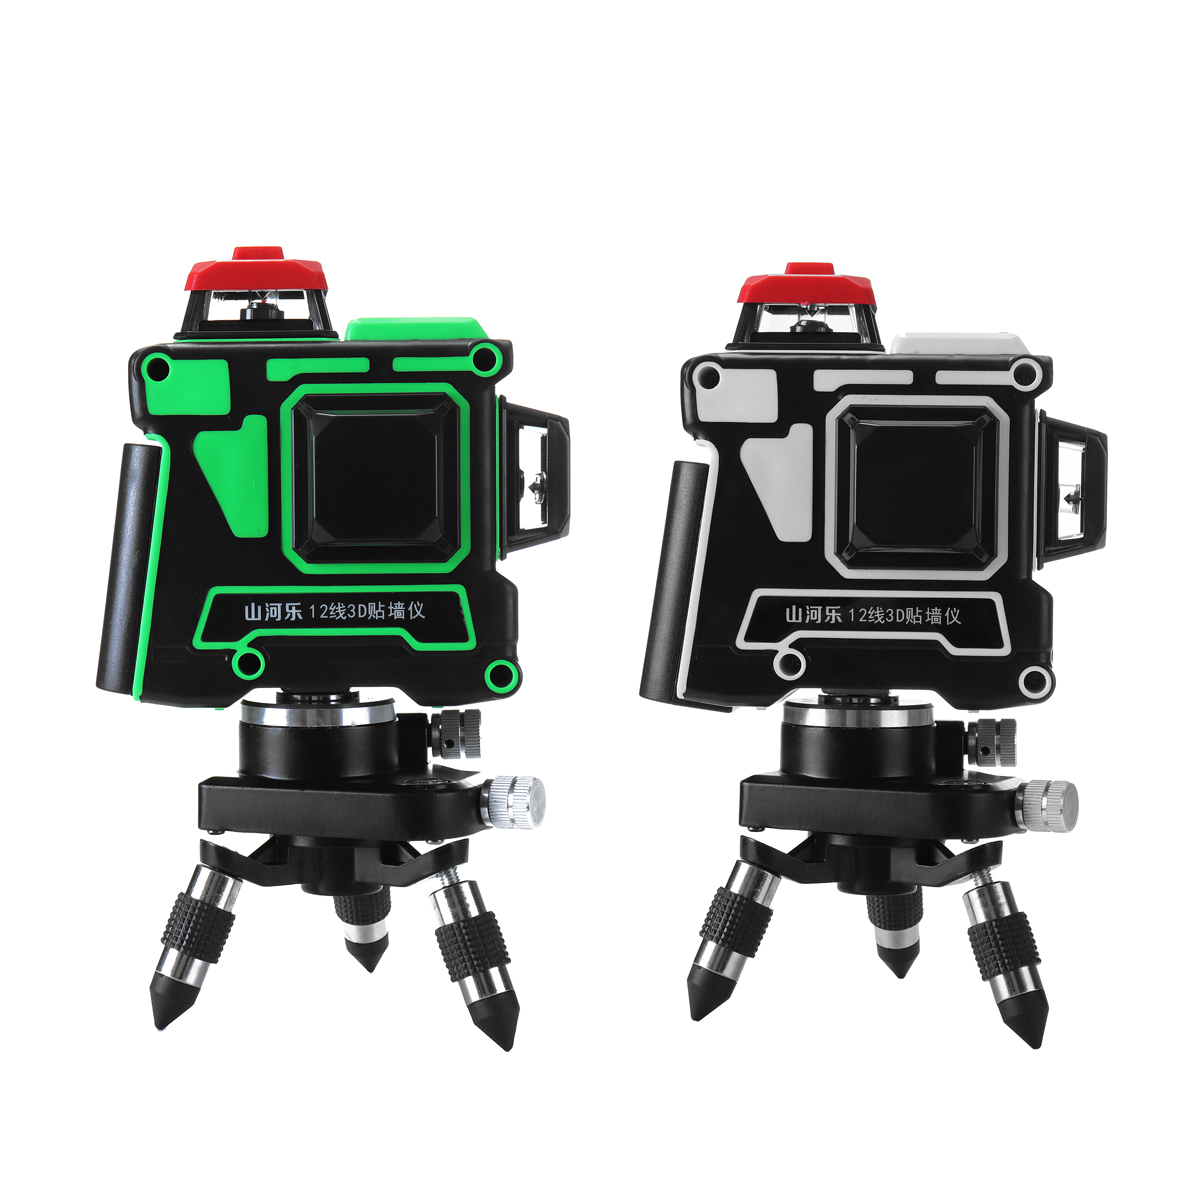 

12 Line Green/Blue Laser Level with 1/2 Battery 638nm/808nm 3D 360 Degree Rotation Auto Leveling Horizontal Vertical Laser Beam